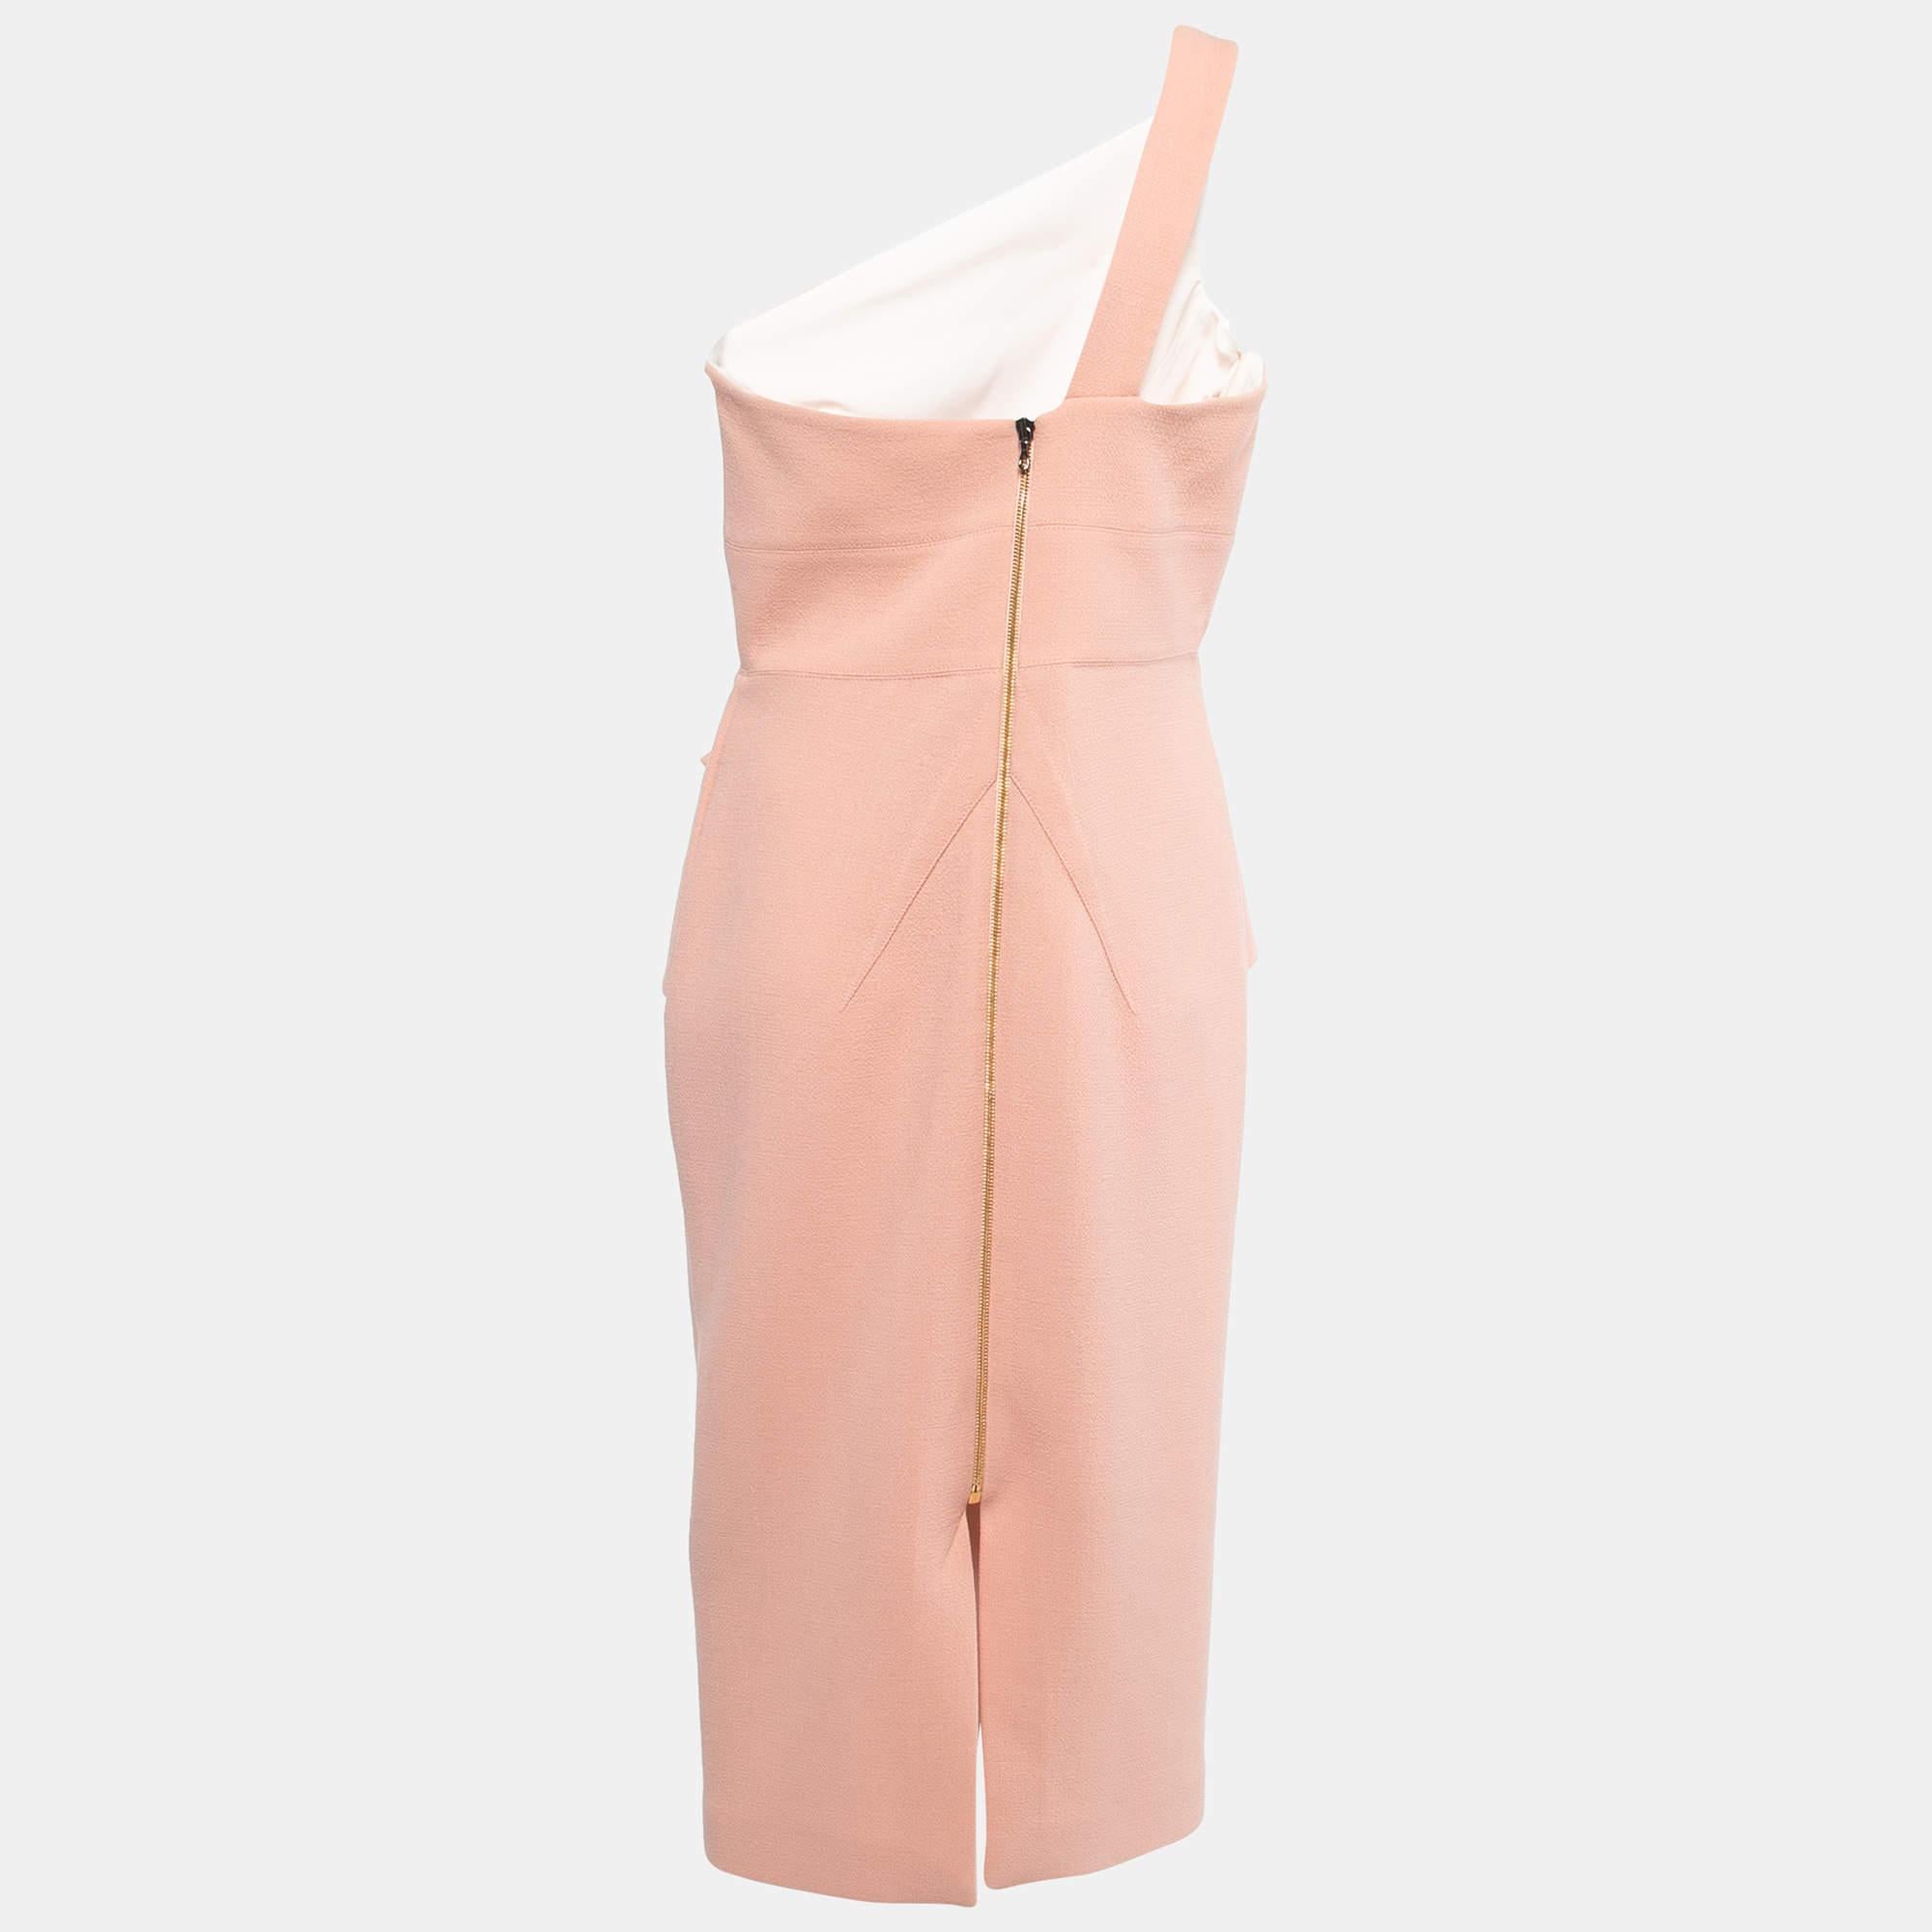 The fine artistry and the feminine silhouette of this Roland Mouret dress exhibit the label's impeccable craftsmanship in tailoring. It is stitched using wool, has a good fit, and can be easily styled with pumps as well as sandals.

